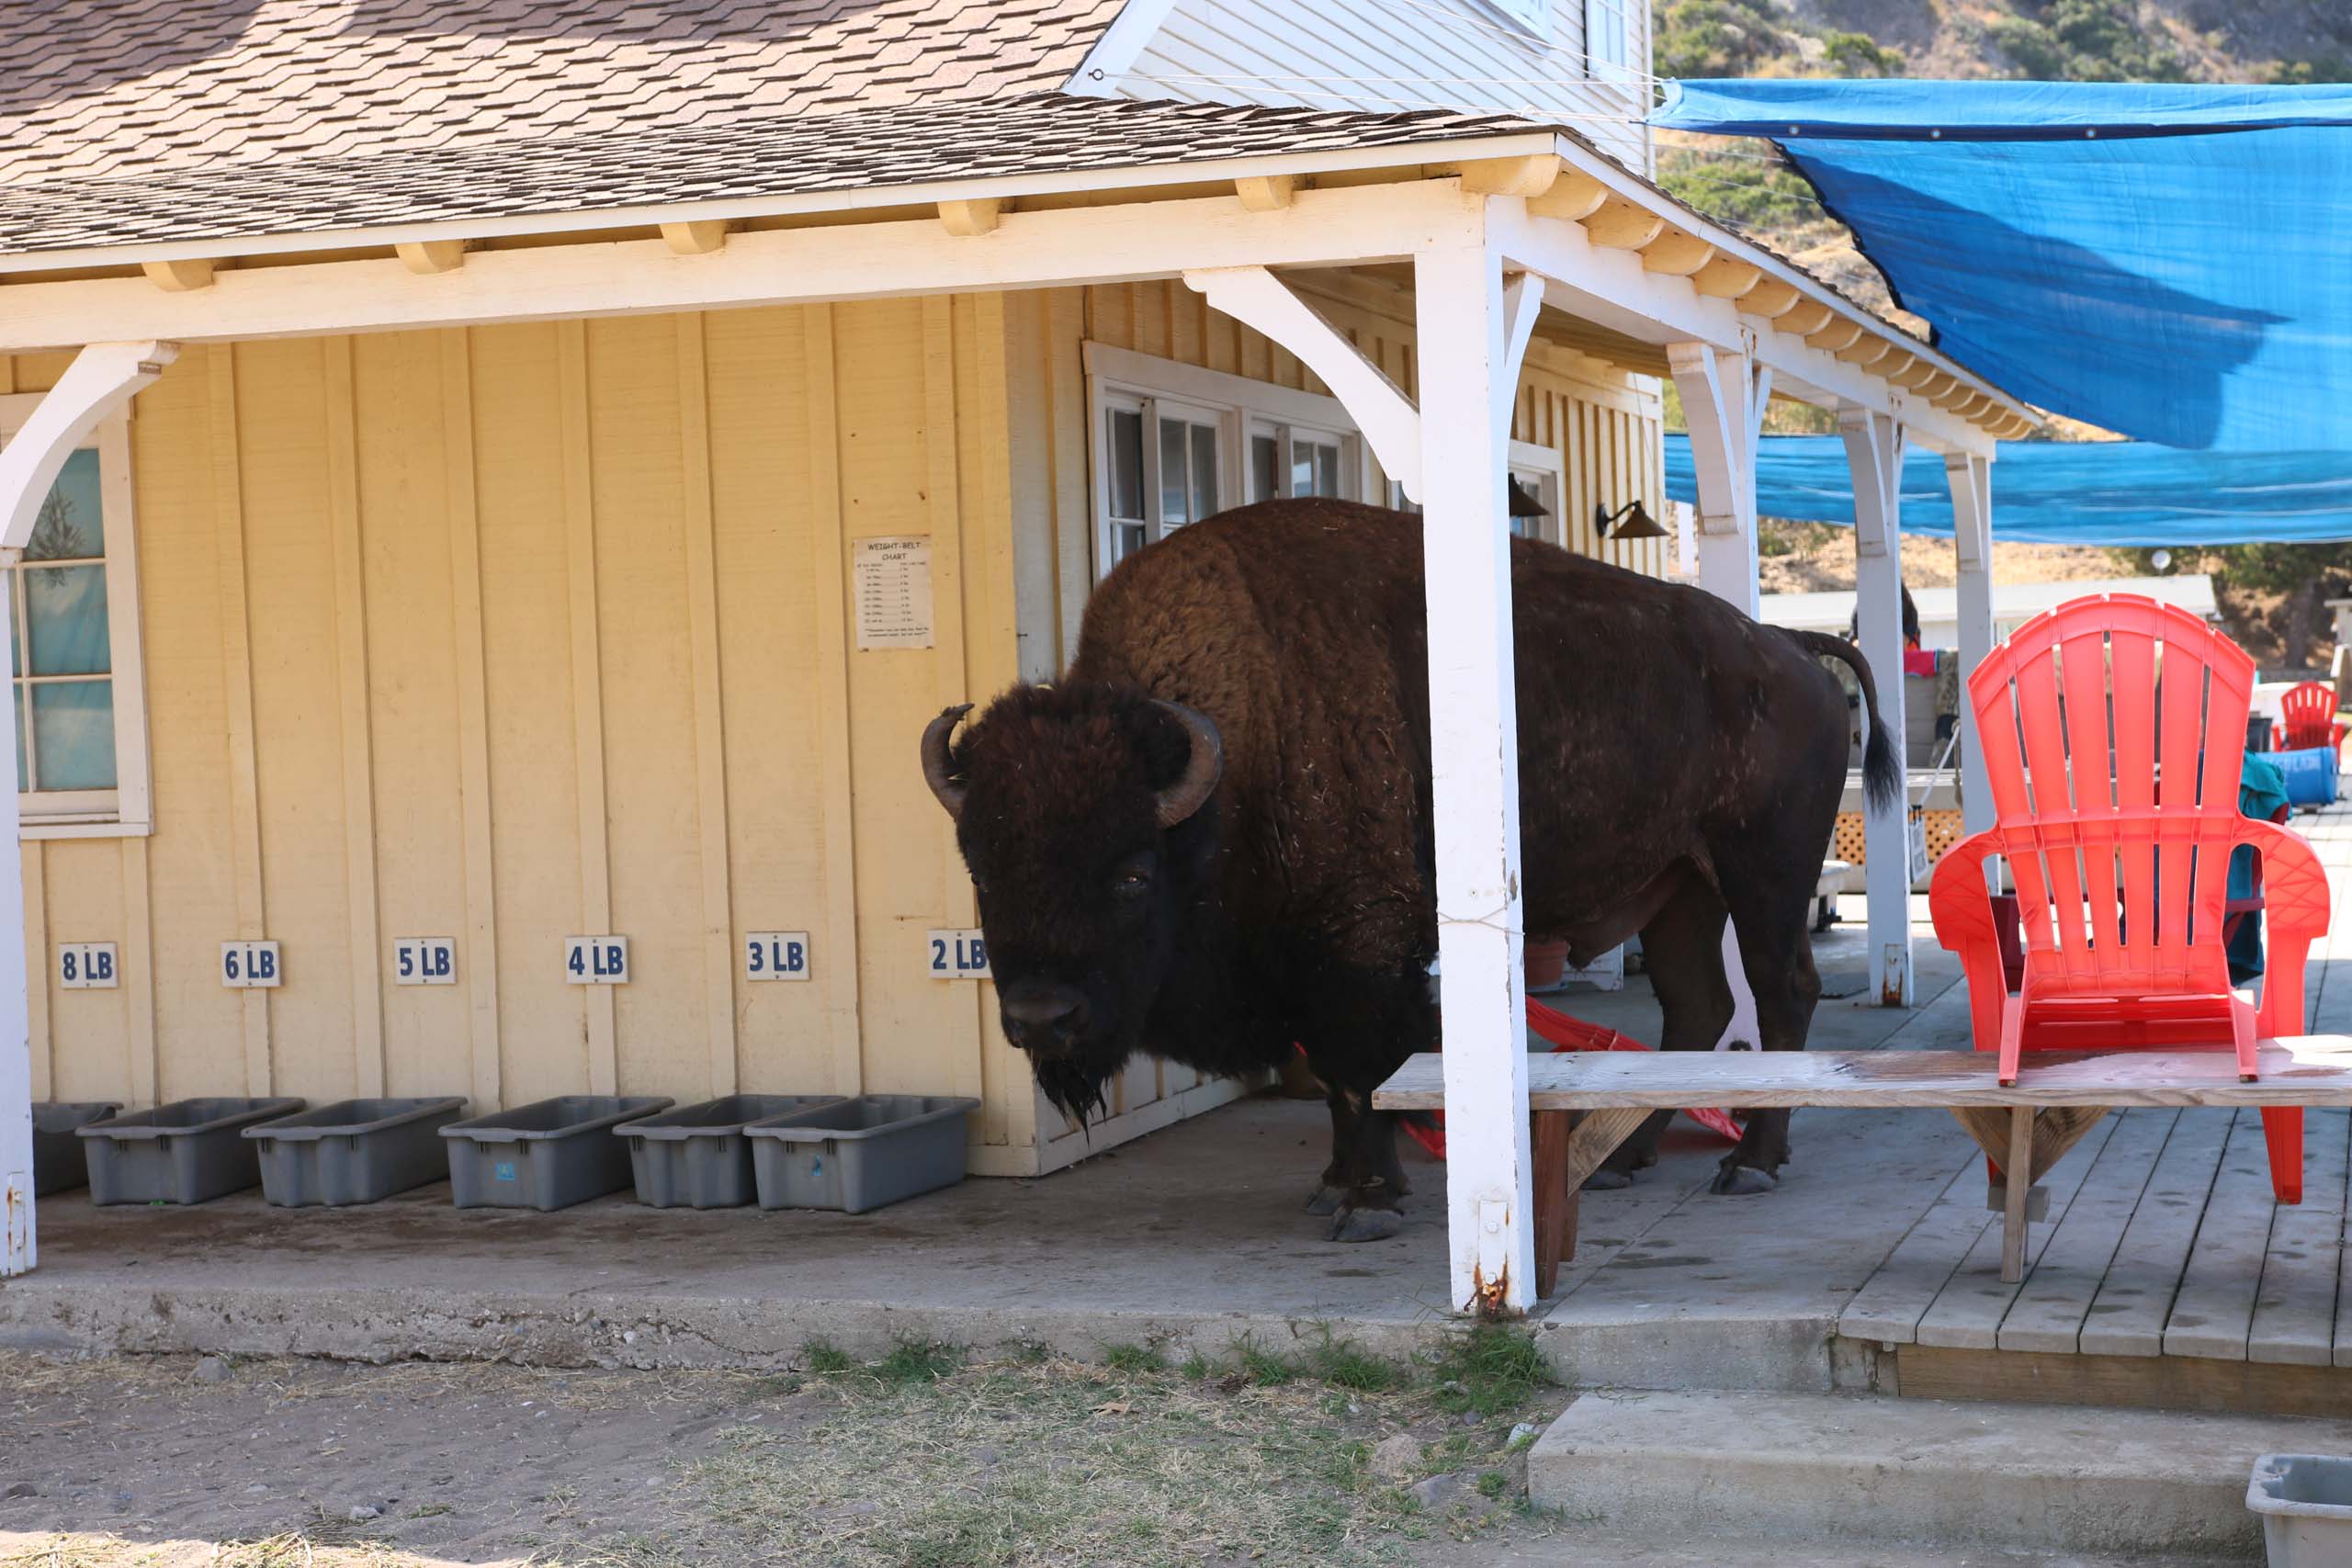 Bison in cabin.